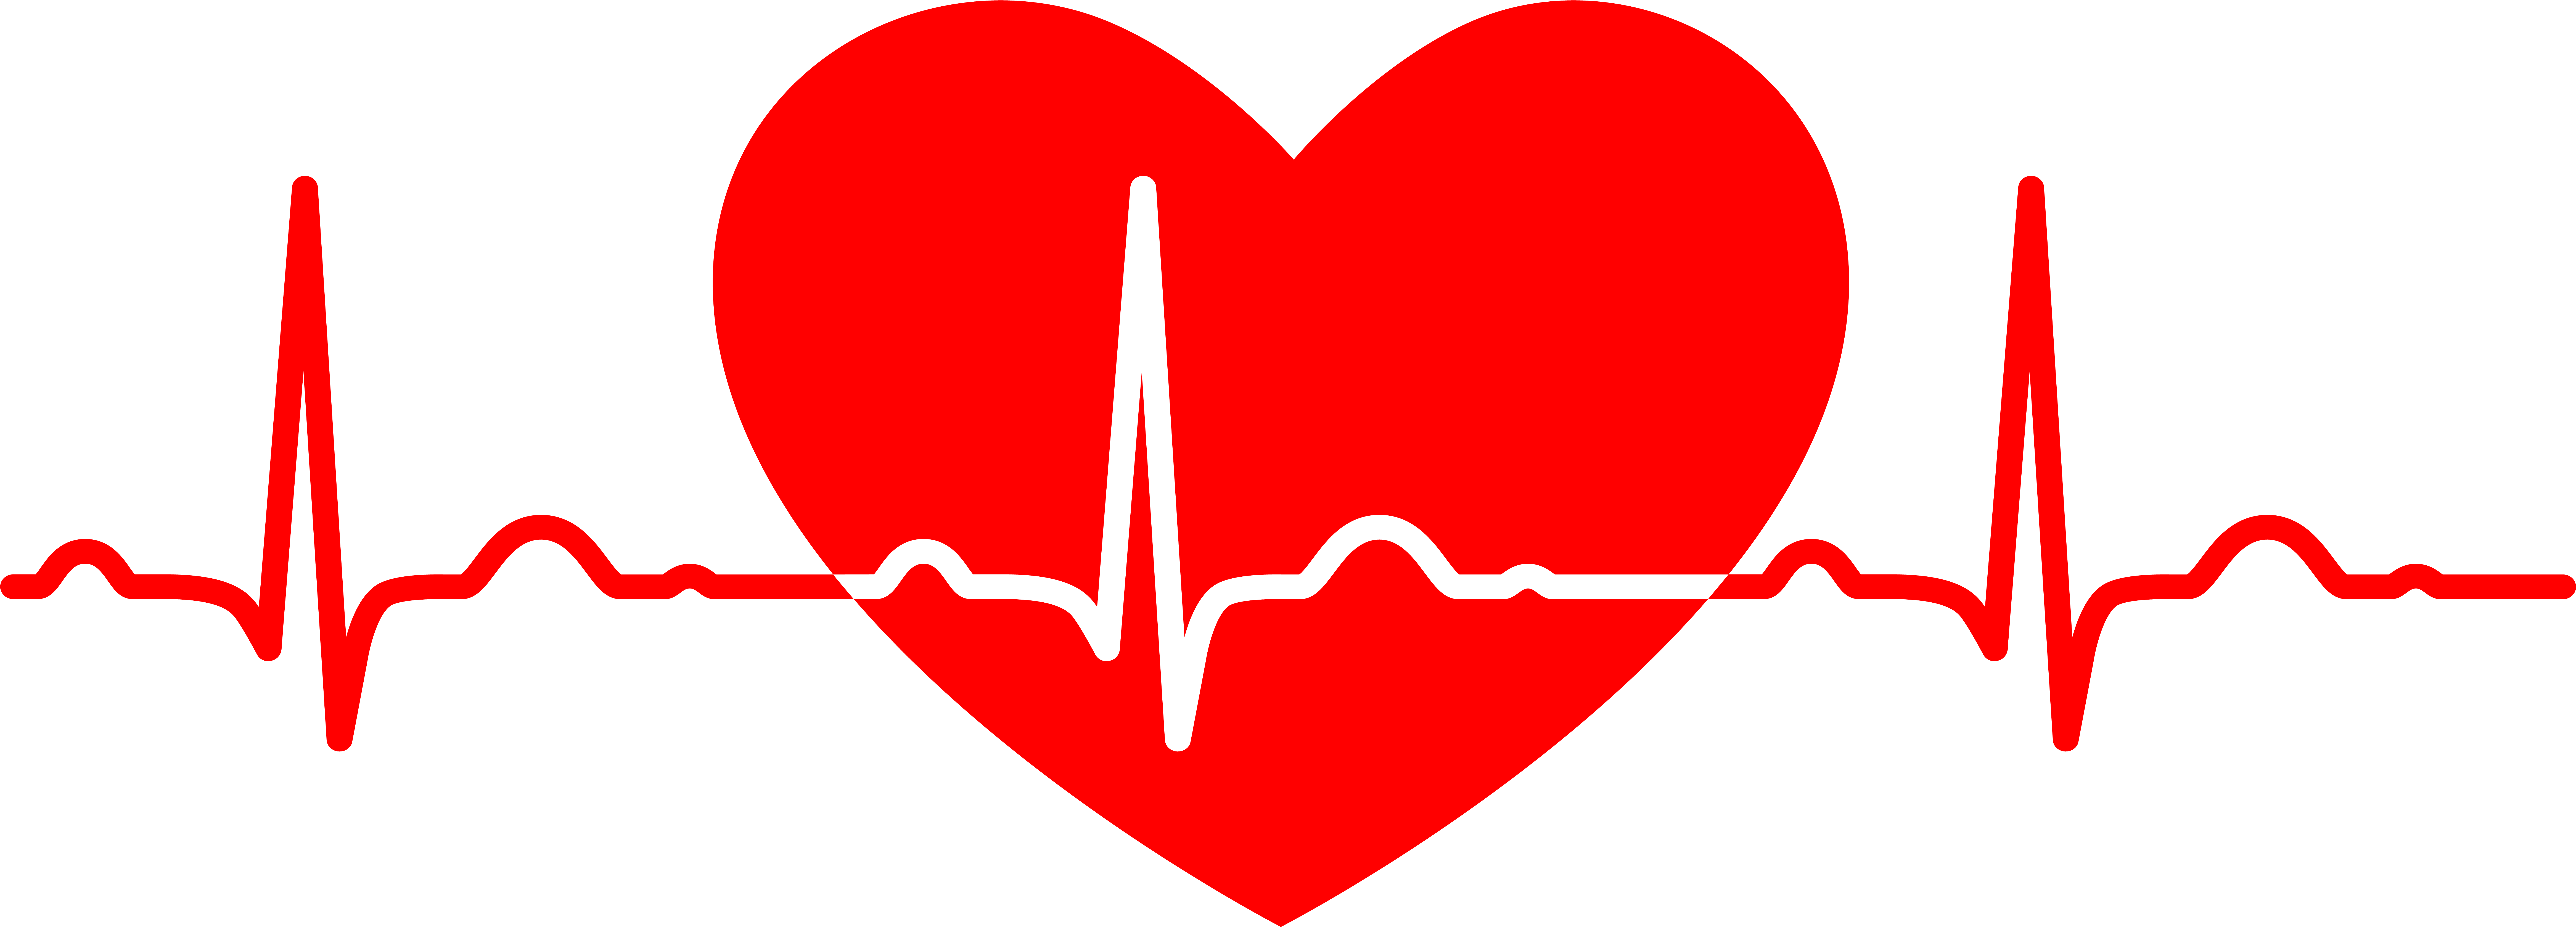 Electrocardiography Heart Rate Medicine Clip Art - Electrocardiography Heart Rate Medicine Clip Art (9329x7050)